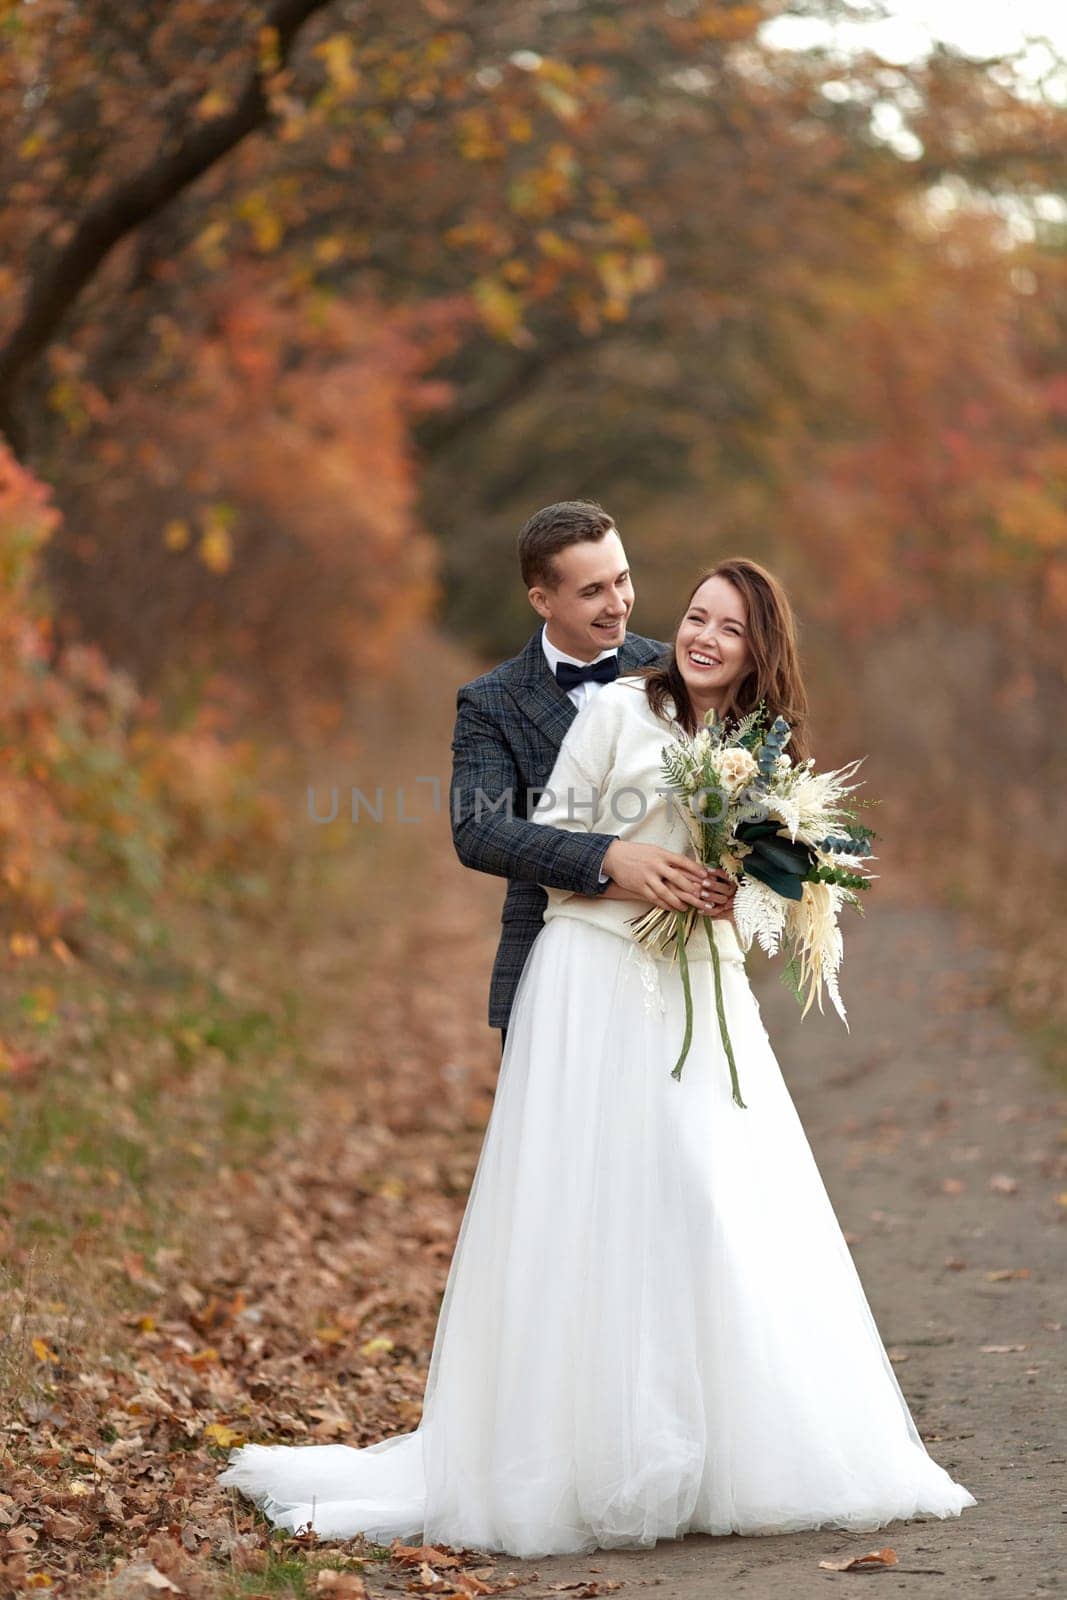 l bride in wedding dress and groom standing in countryside